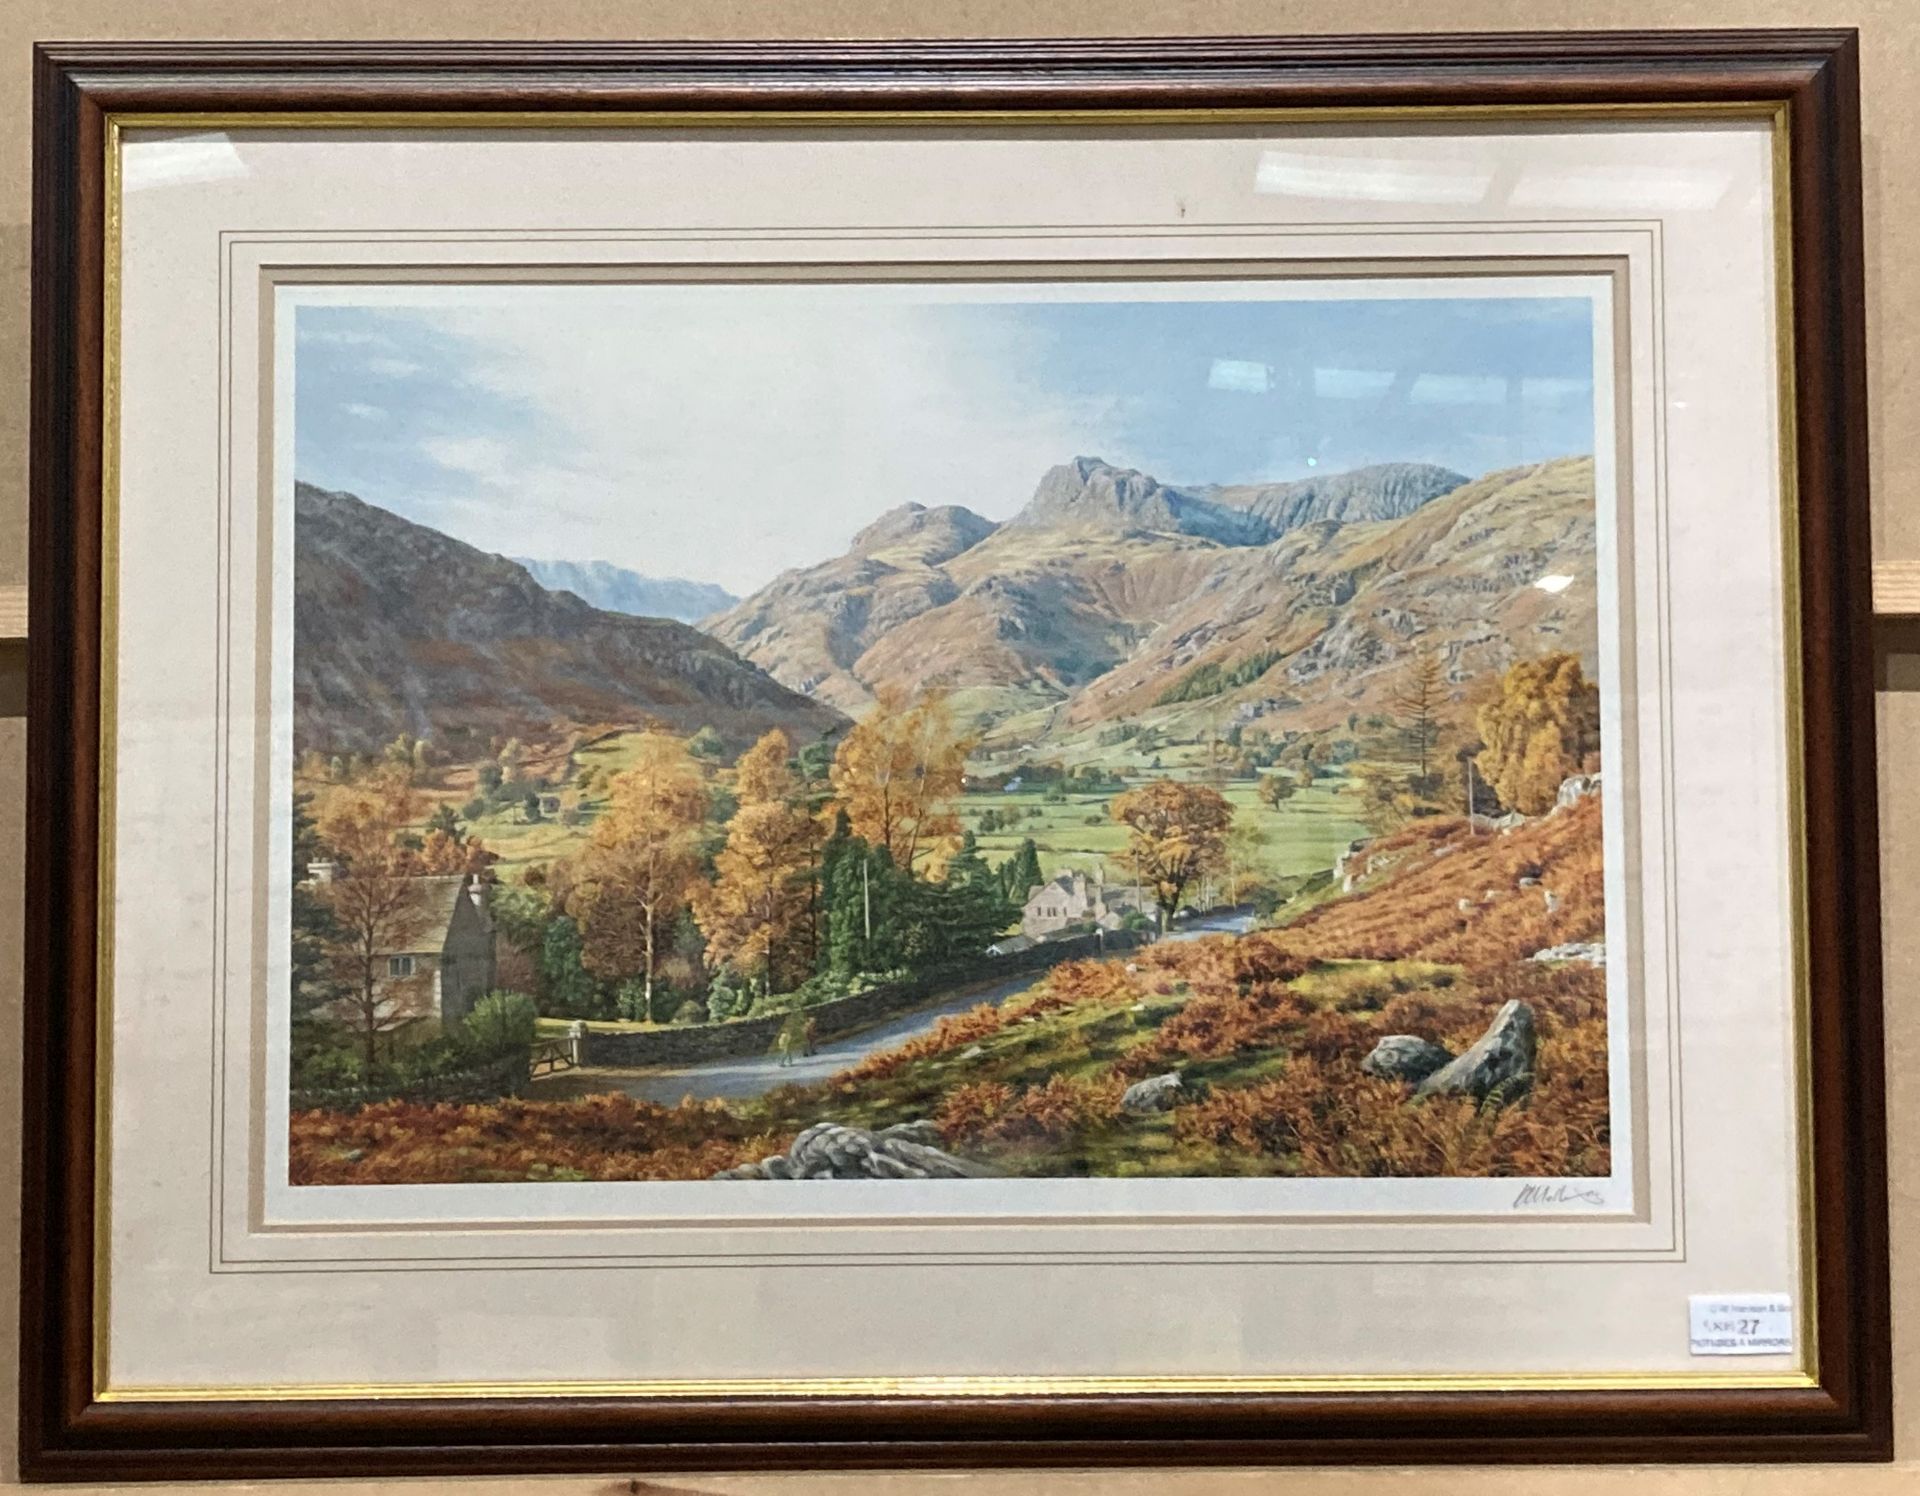 K Melling, 'Great Langdale', print with signature in pencil, framed,